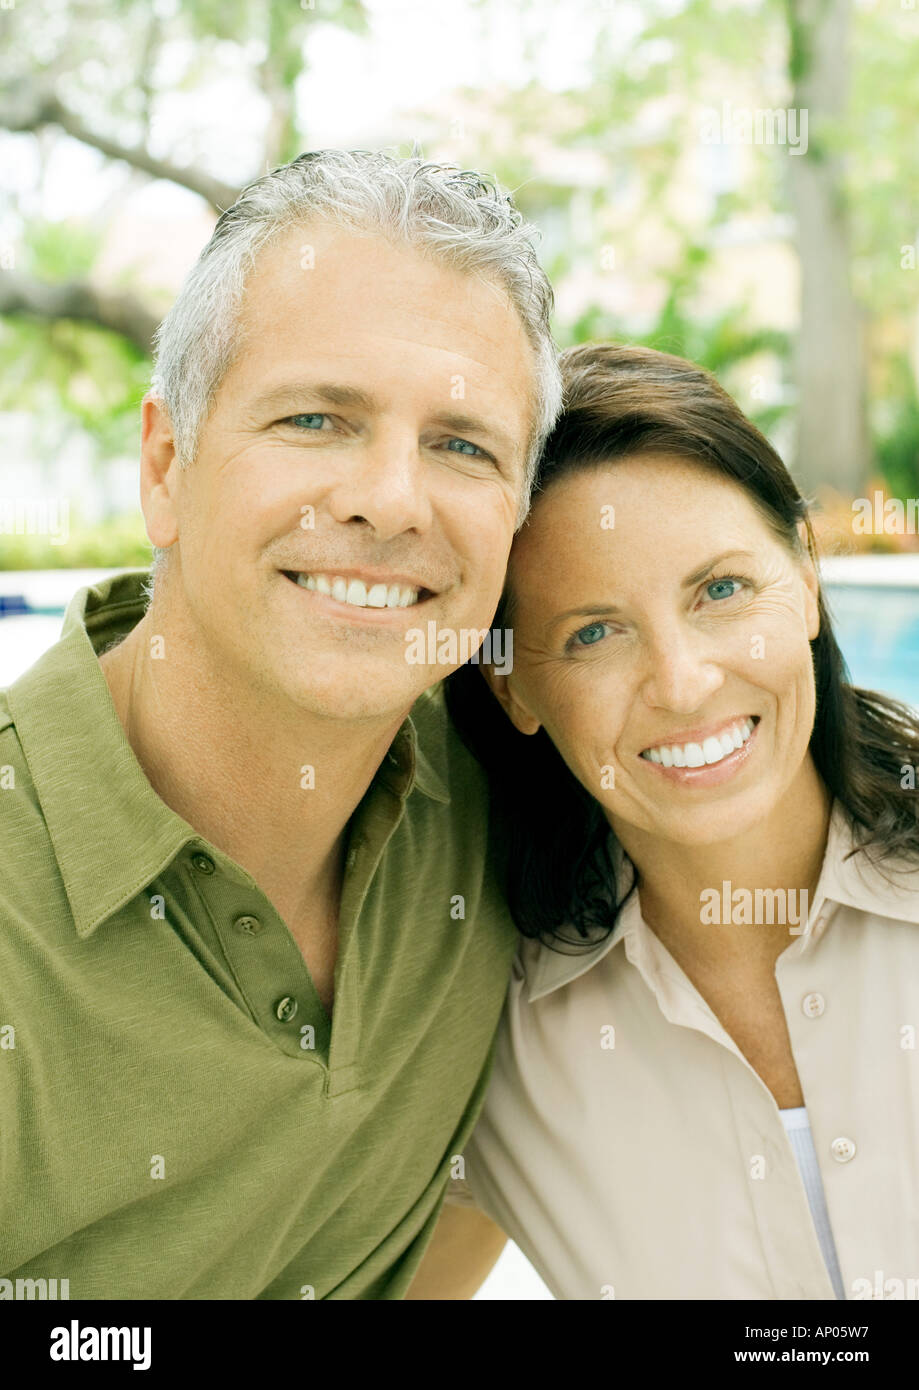 Mature couple smiling, portrait, pool in background Stock Photo